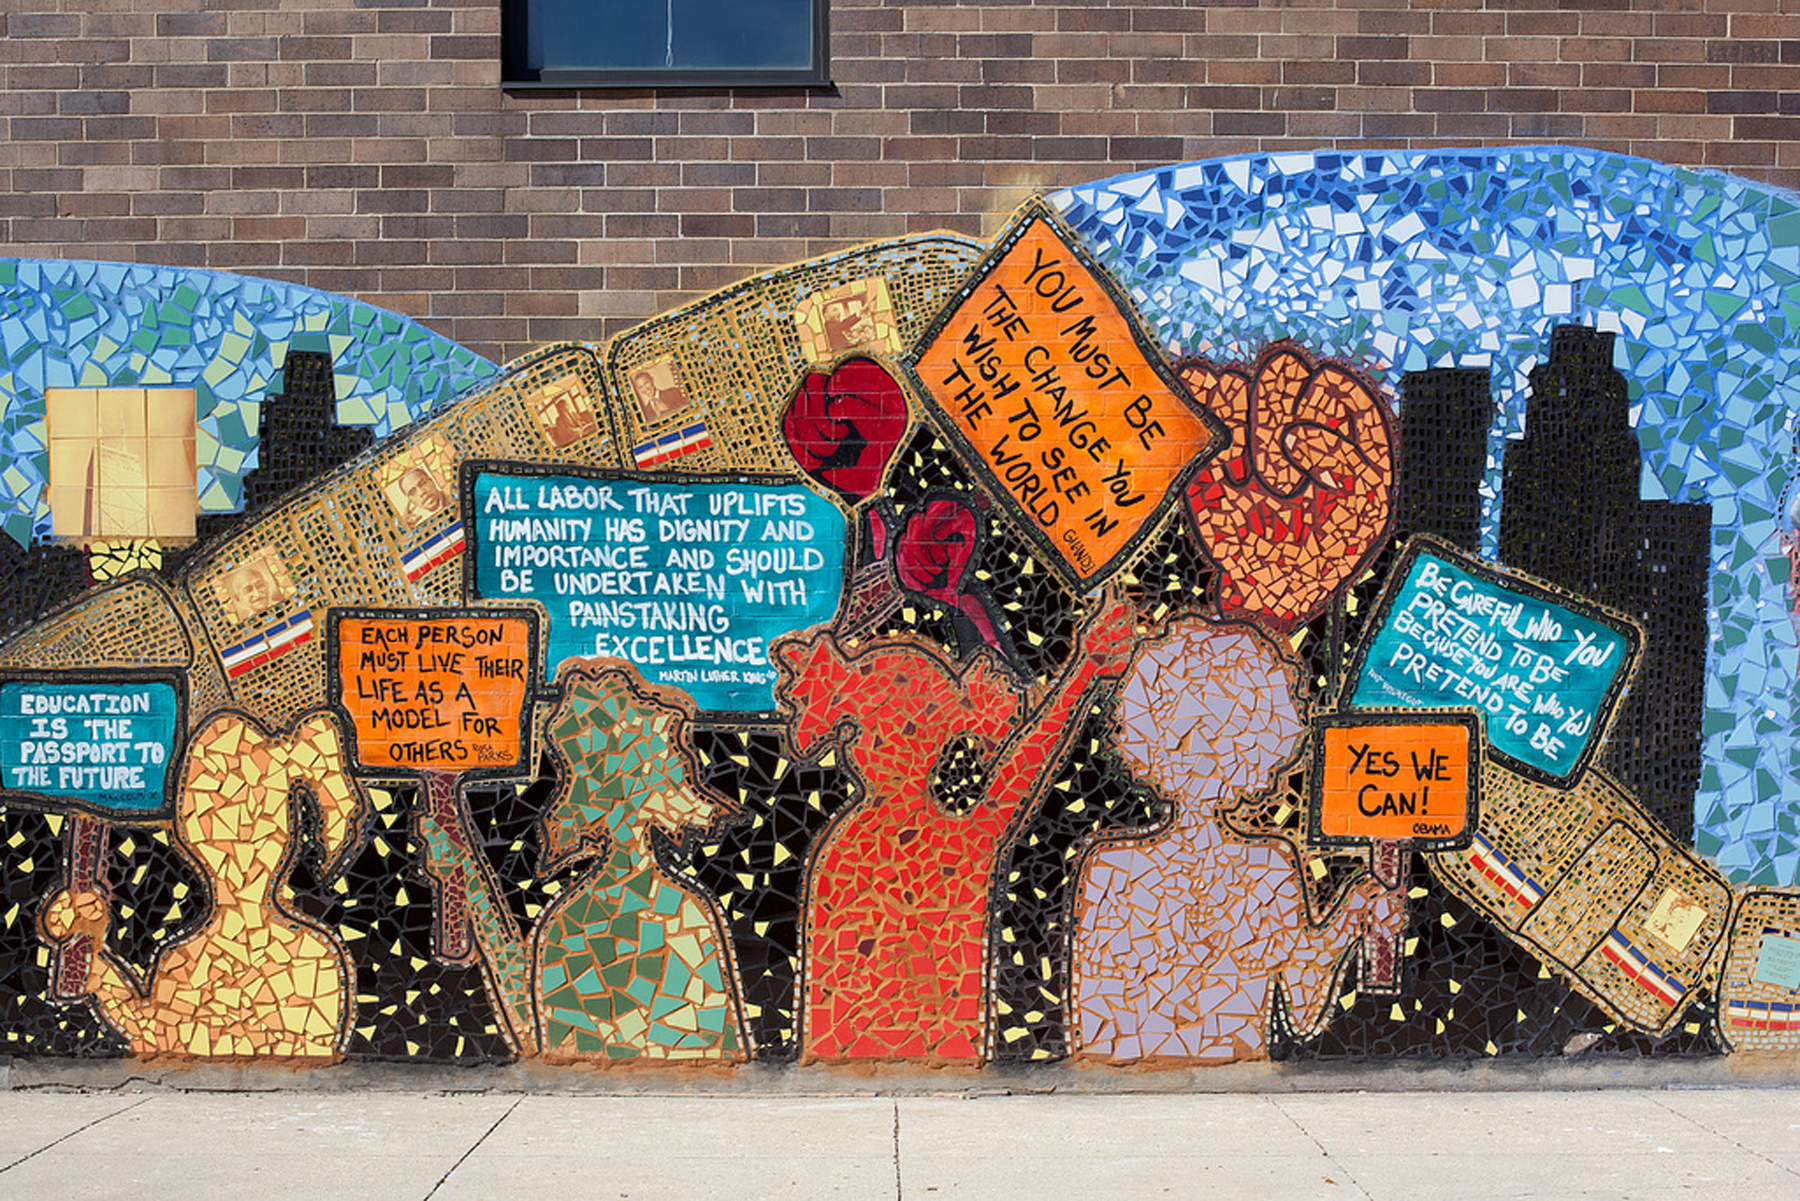 The mosaic at Uplift Community High School in Uptown features images of community activists and the neighborhood.